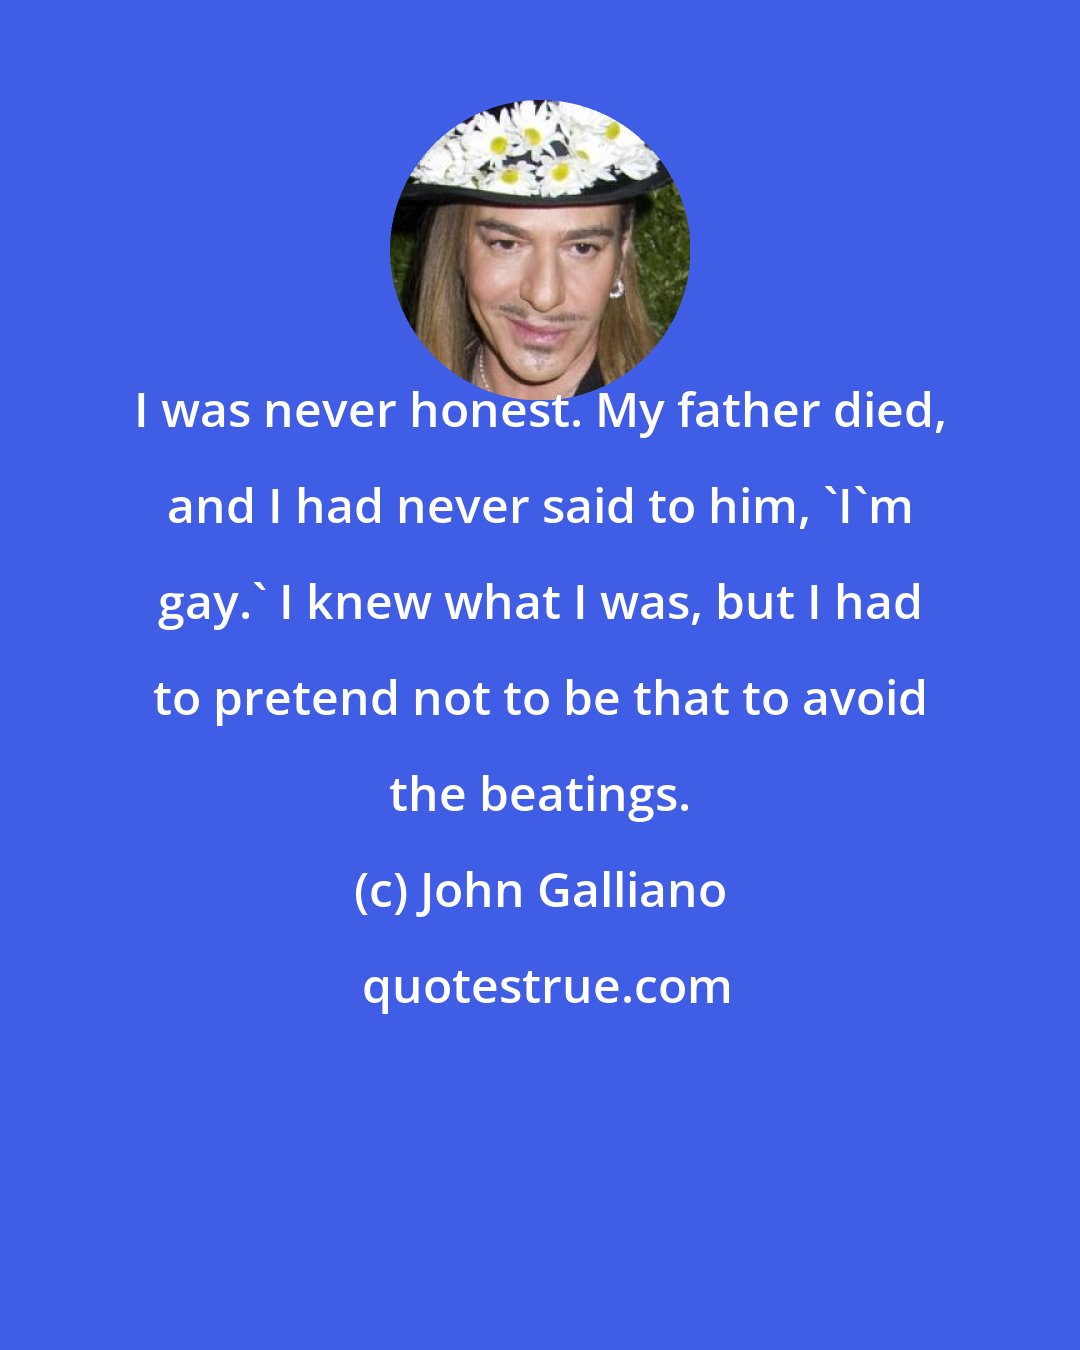 John Galliano: I was never honest. My father died, and I had never said to him, 'I'm gay.' I knew what I was, but I had to pretend not to be that to avoid the beatings.